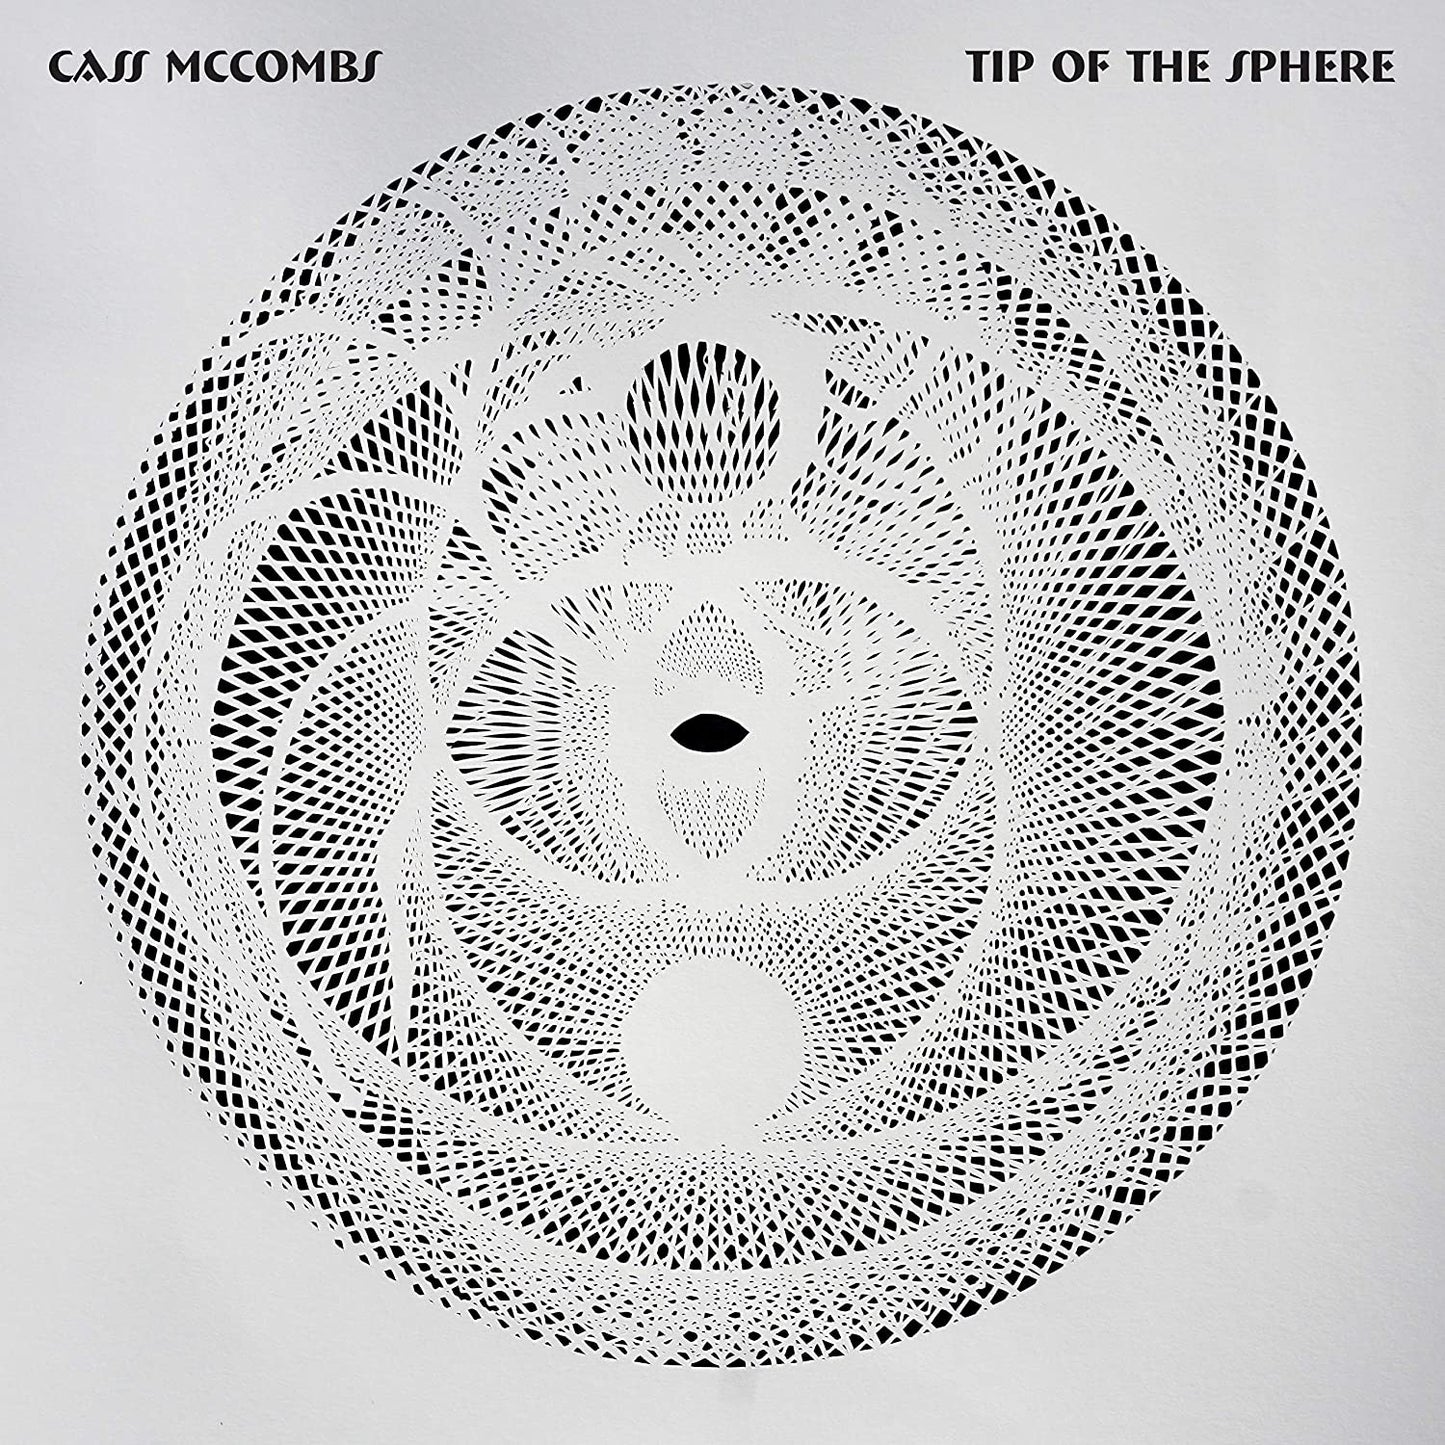 McCombs, Cass/Tip Of The Sphere [CD]